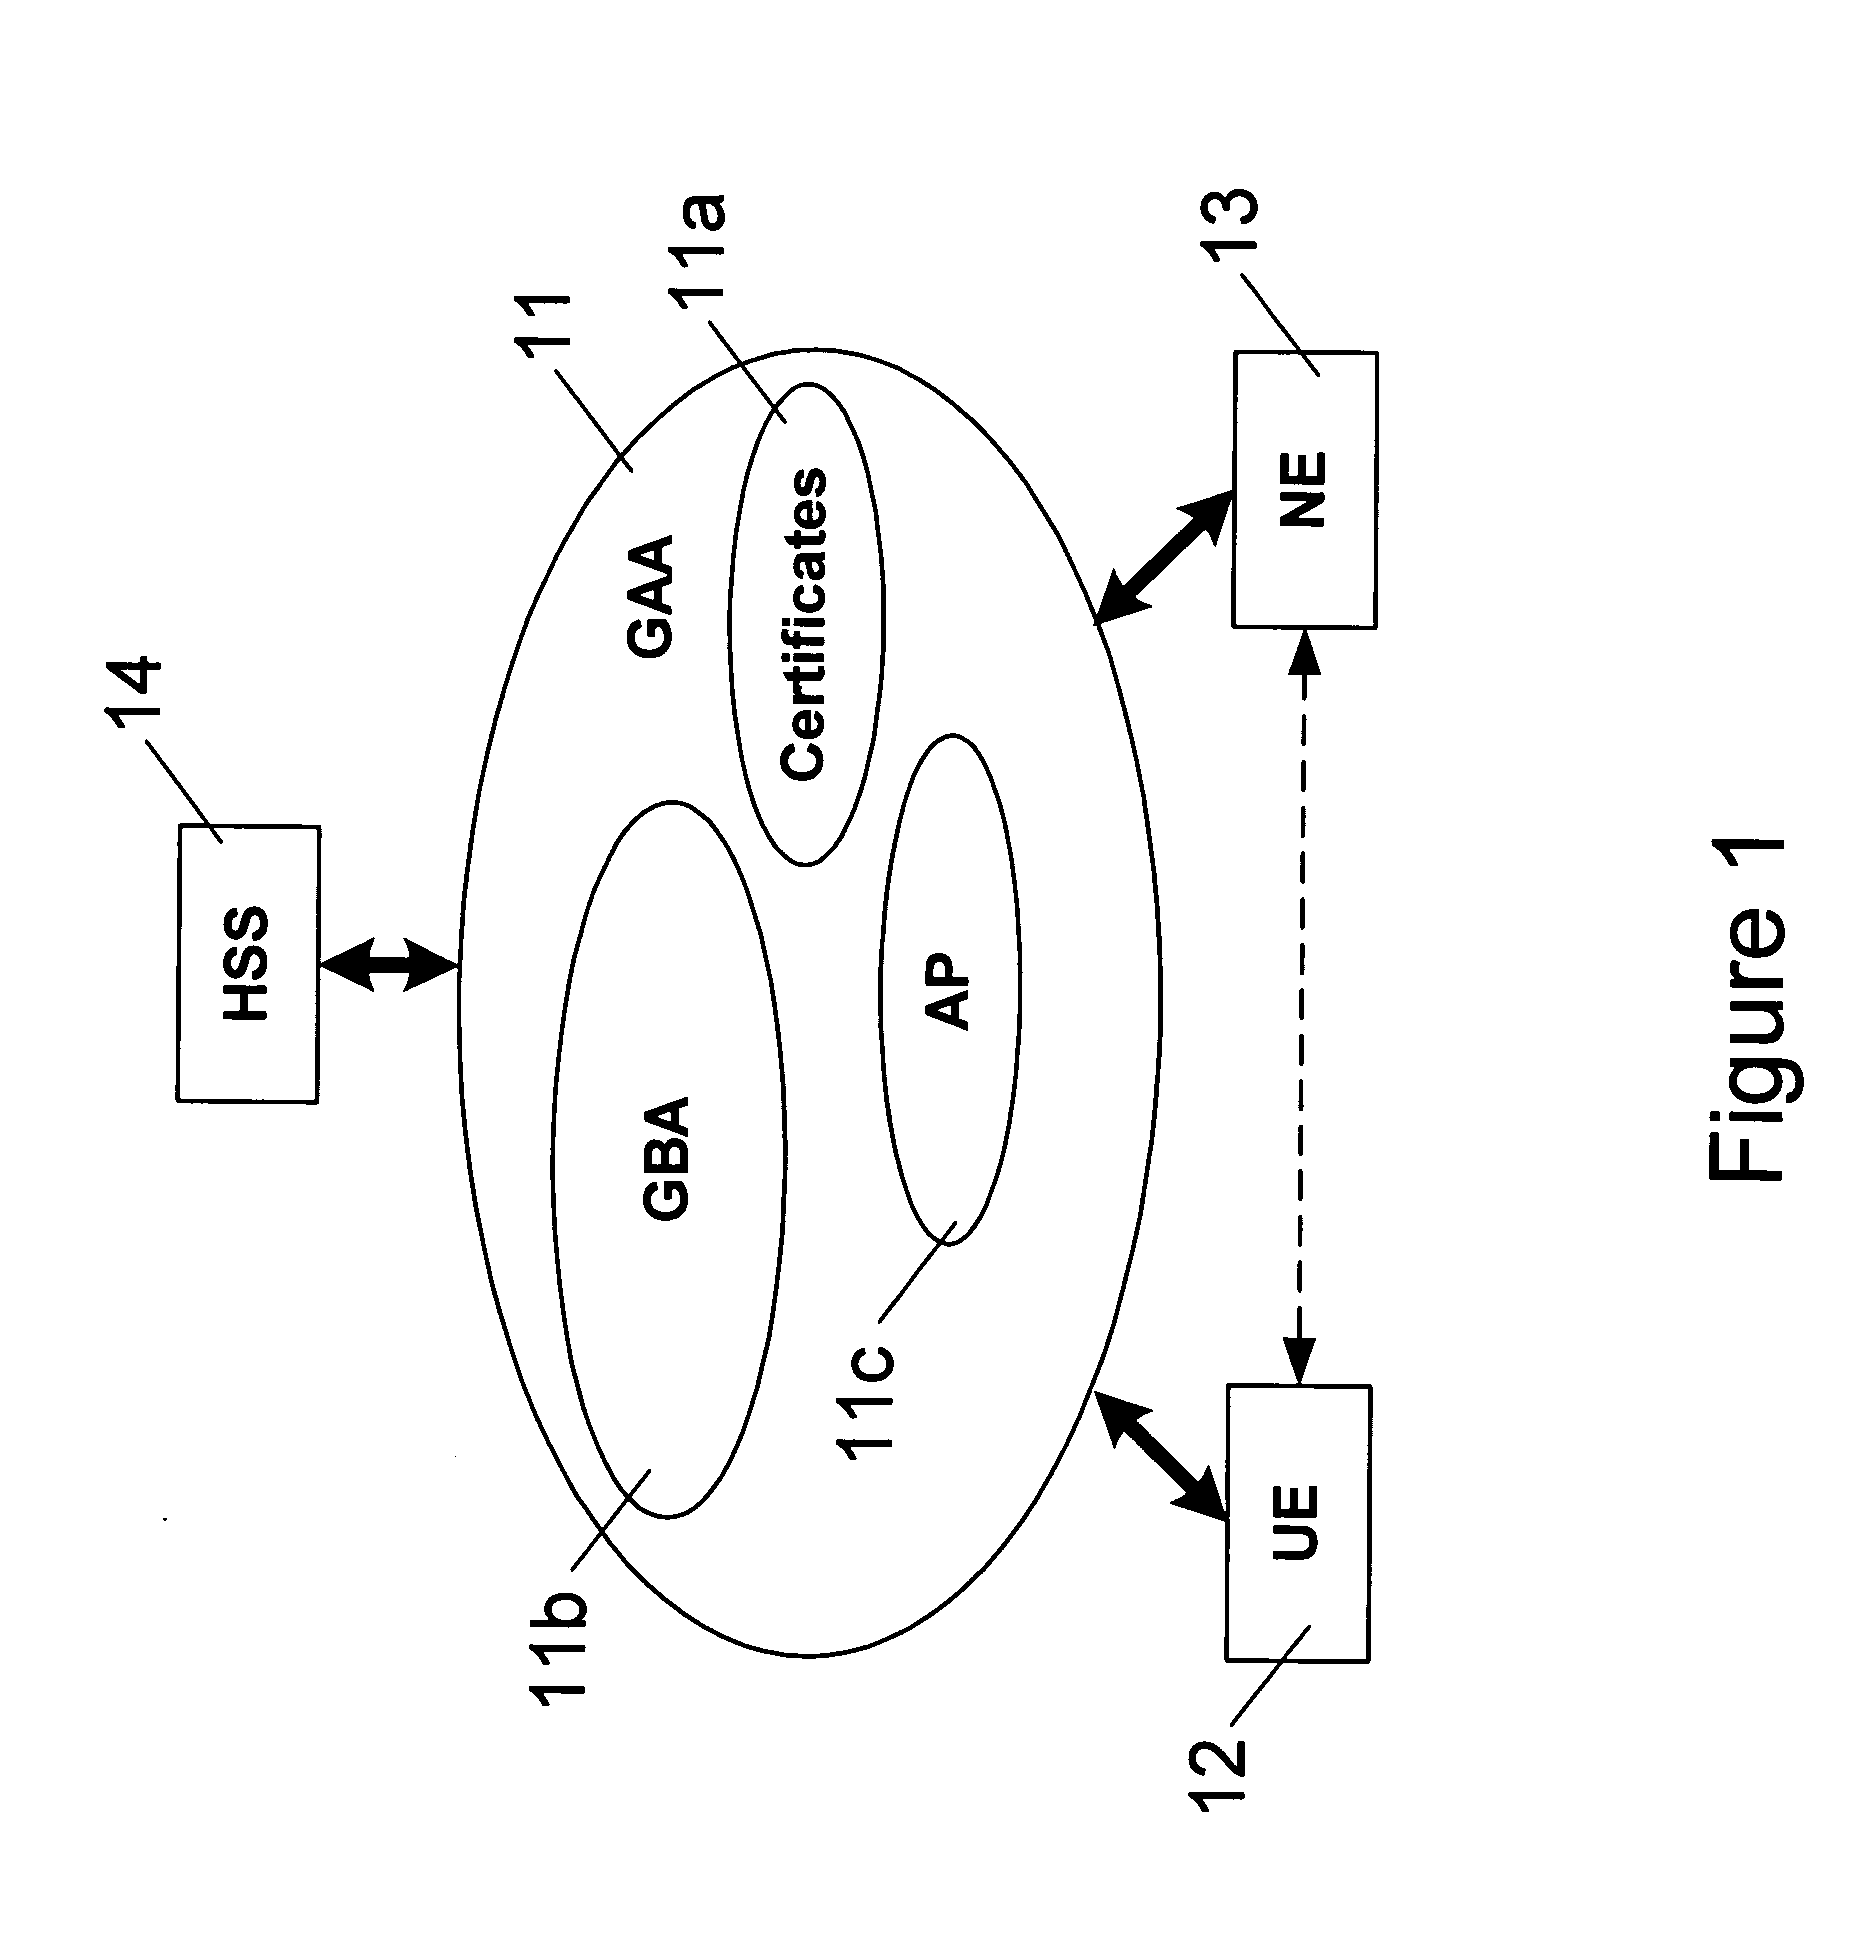 Authentication using GAA functionality for unidirectional network connections